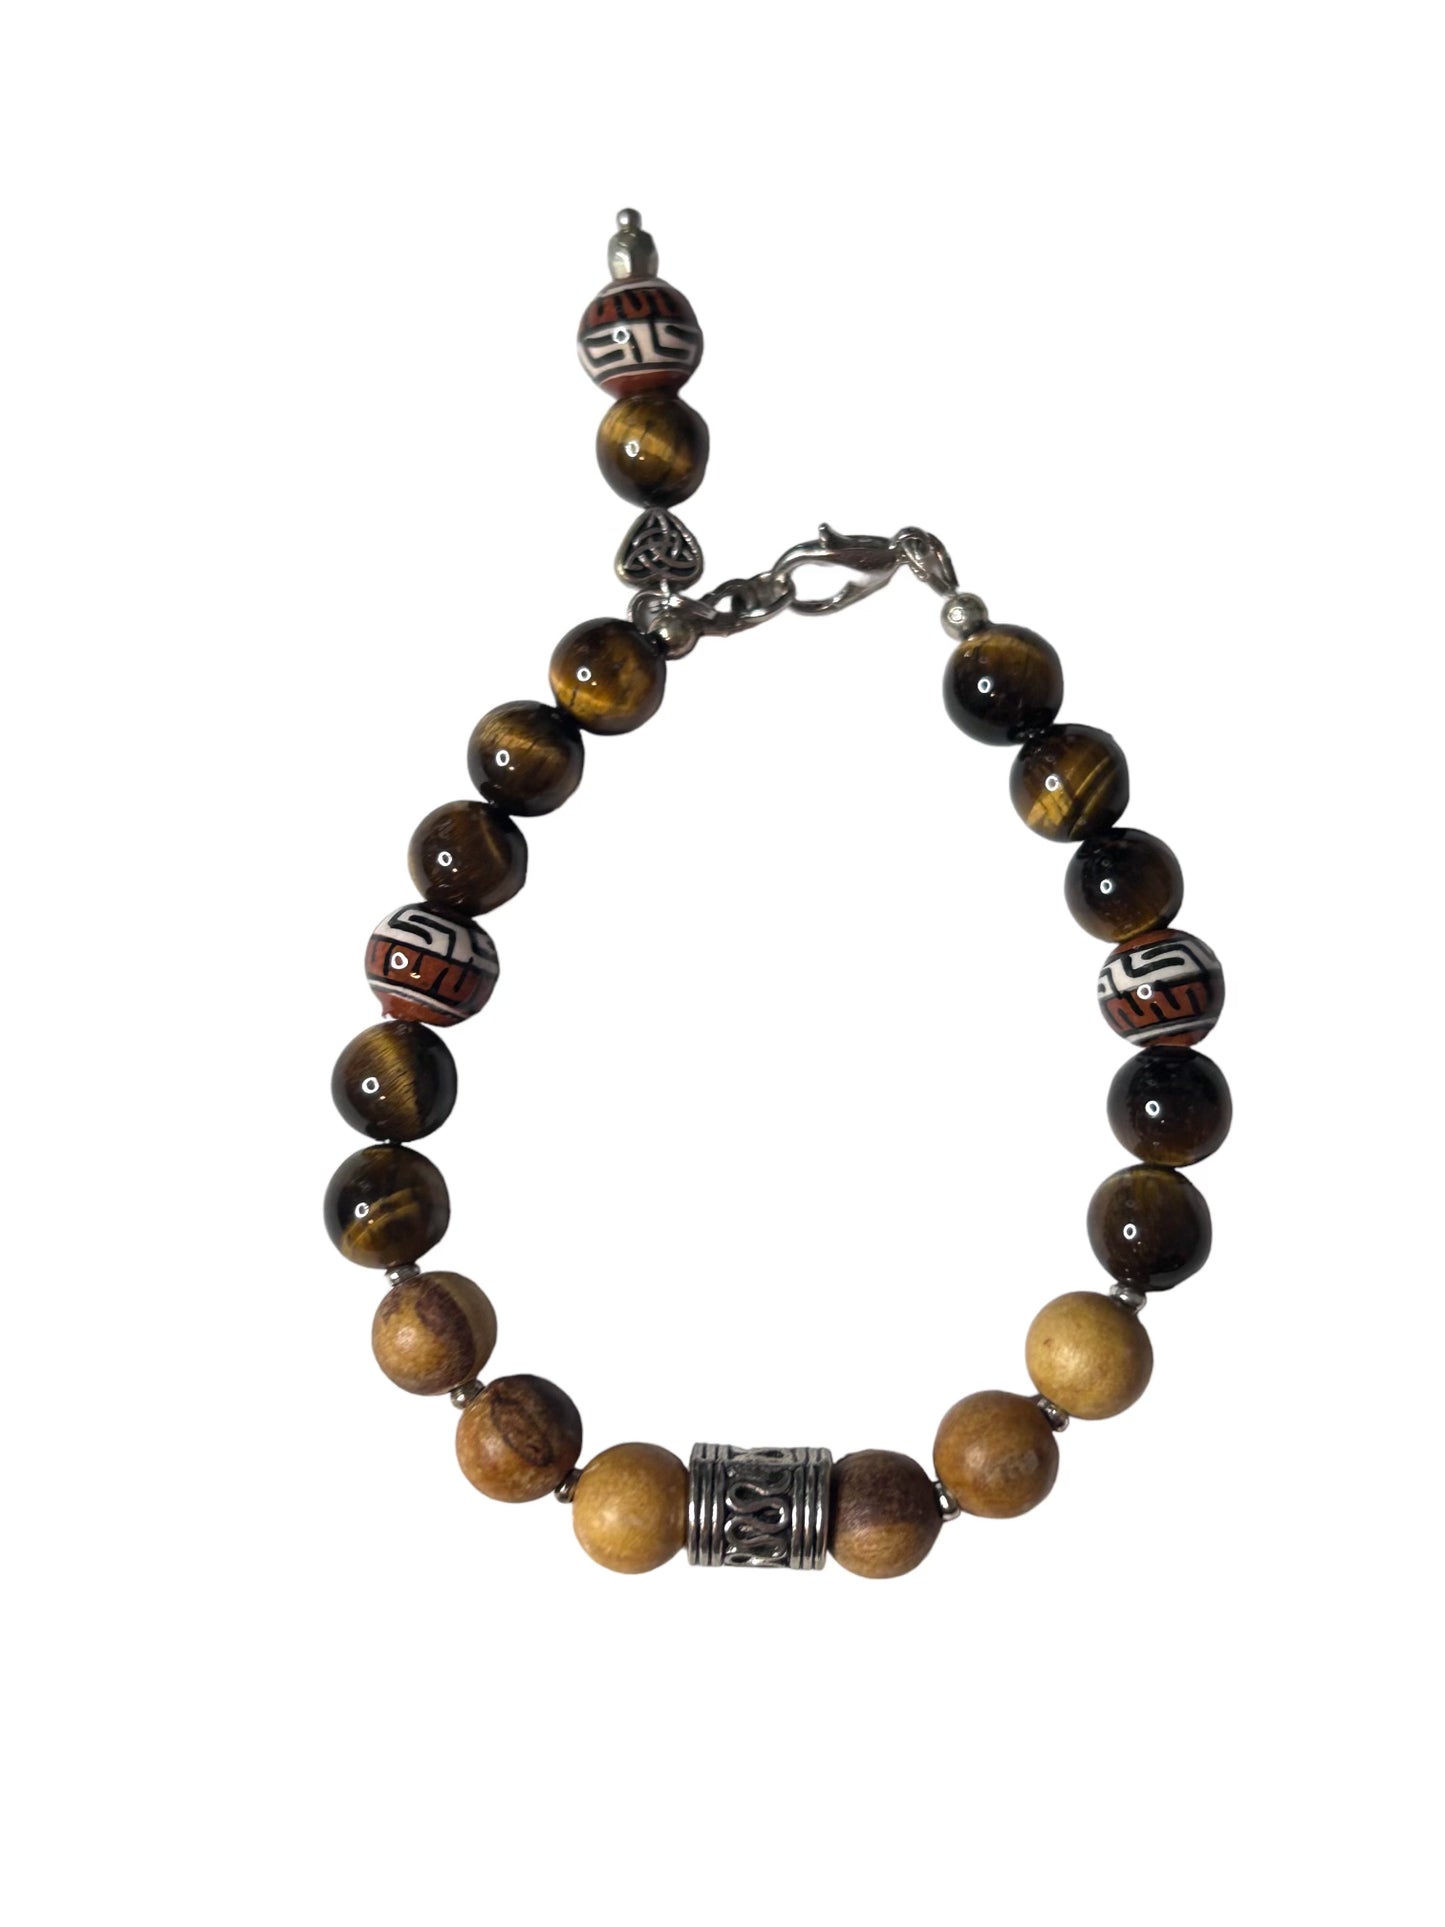 Stylish and Durable Stainless Steel Bracelet with Brown Beads